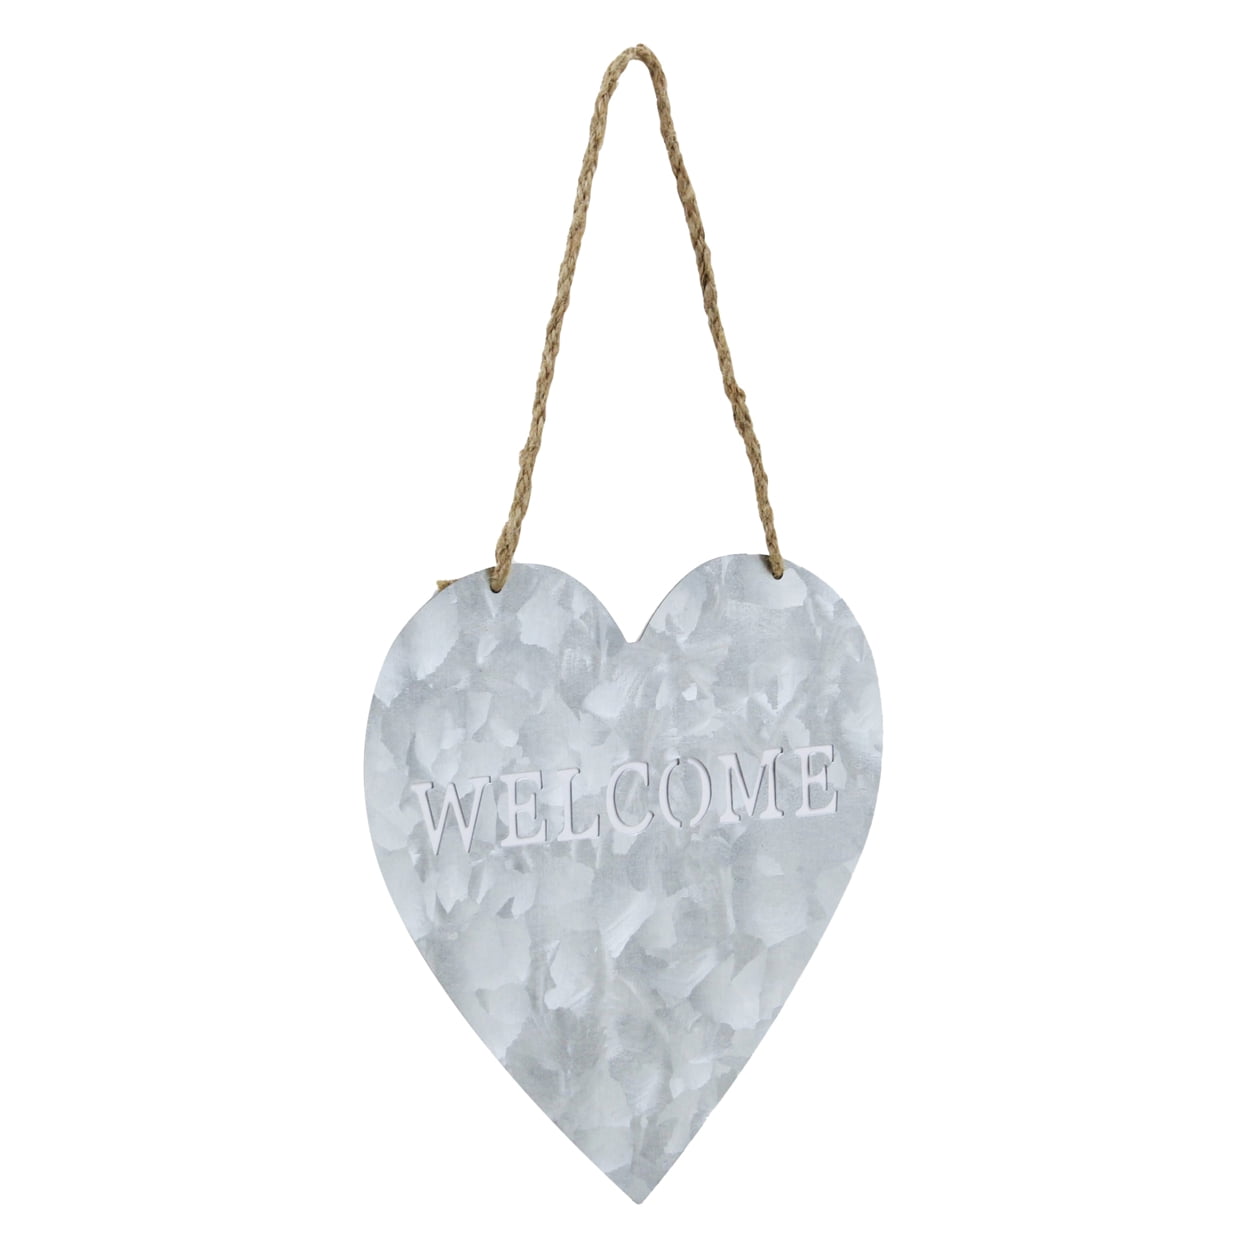 Cheung Fp-3389 Metal Heart Shaped Hanging Welcome